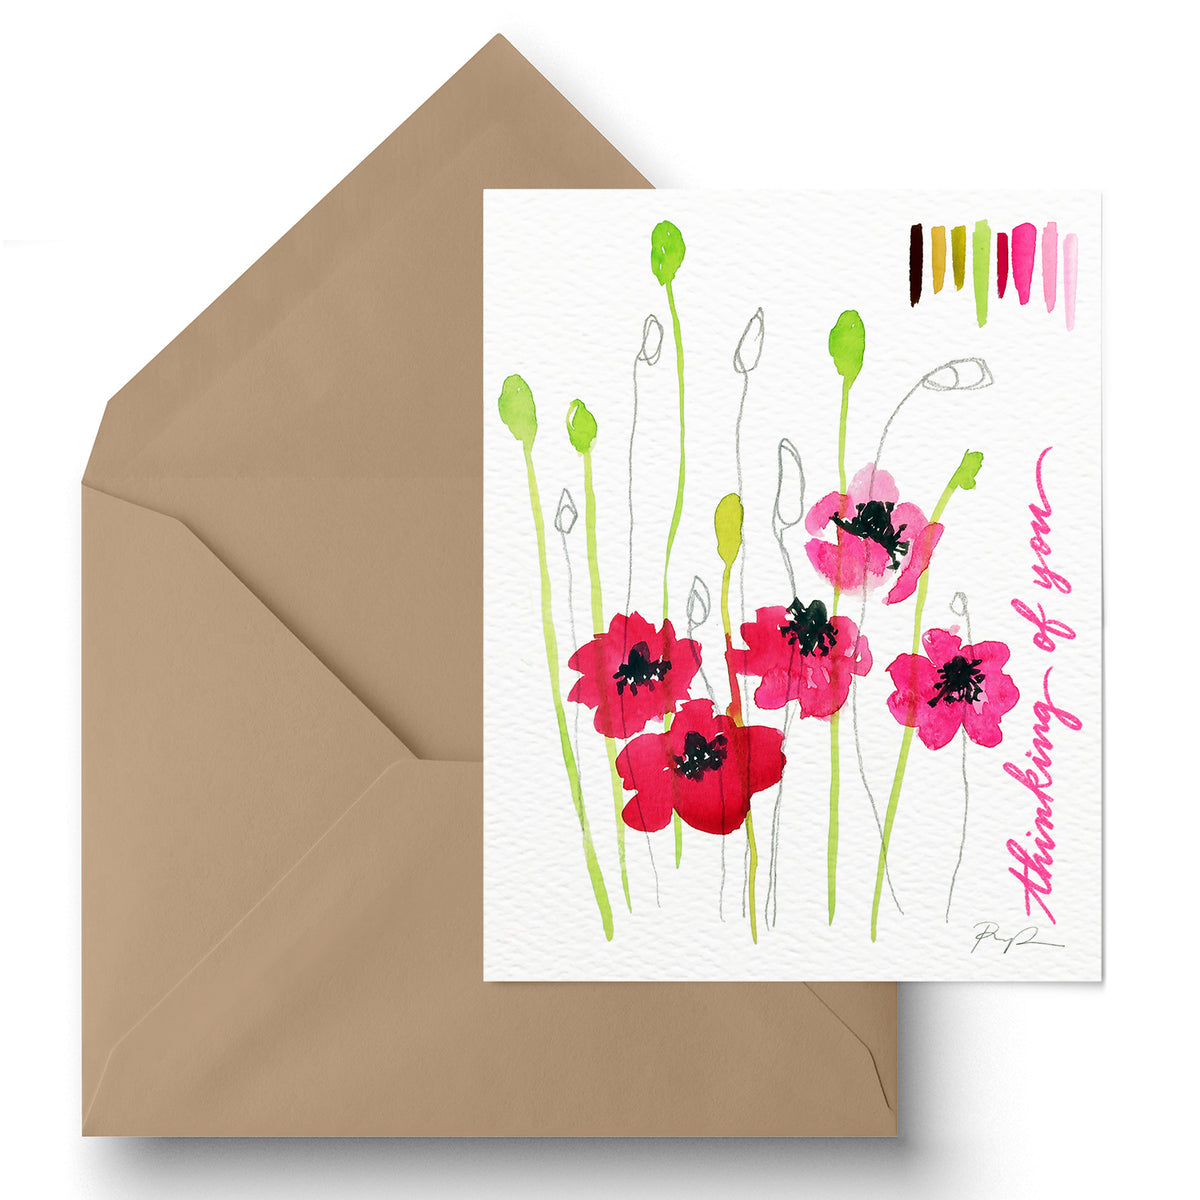  Botanical Watercolors Floral Thinking of You Cards Set - 24  Assorted Blank Watercolor Flower Sympathy Cards with Envelopes & Kraft  Seals - Peony, Poppy, Rose, & Sunflower Note Cards : Office Products